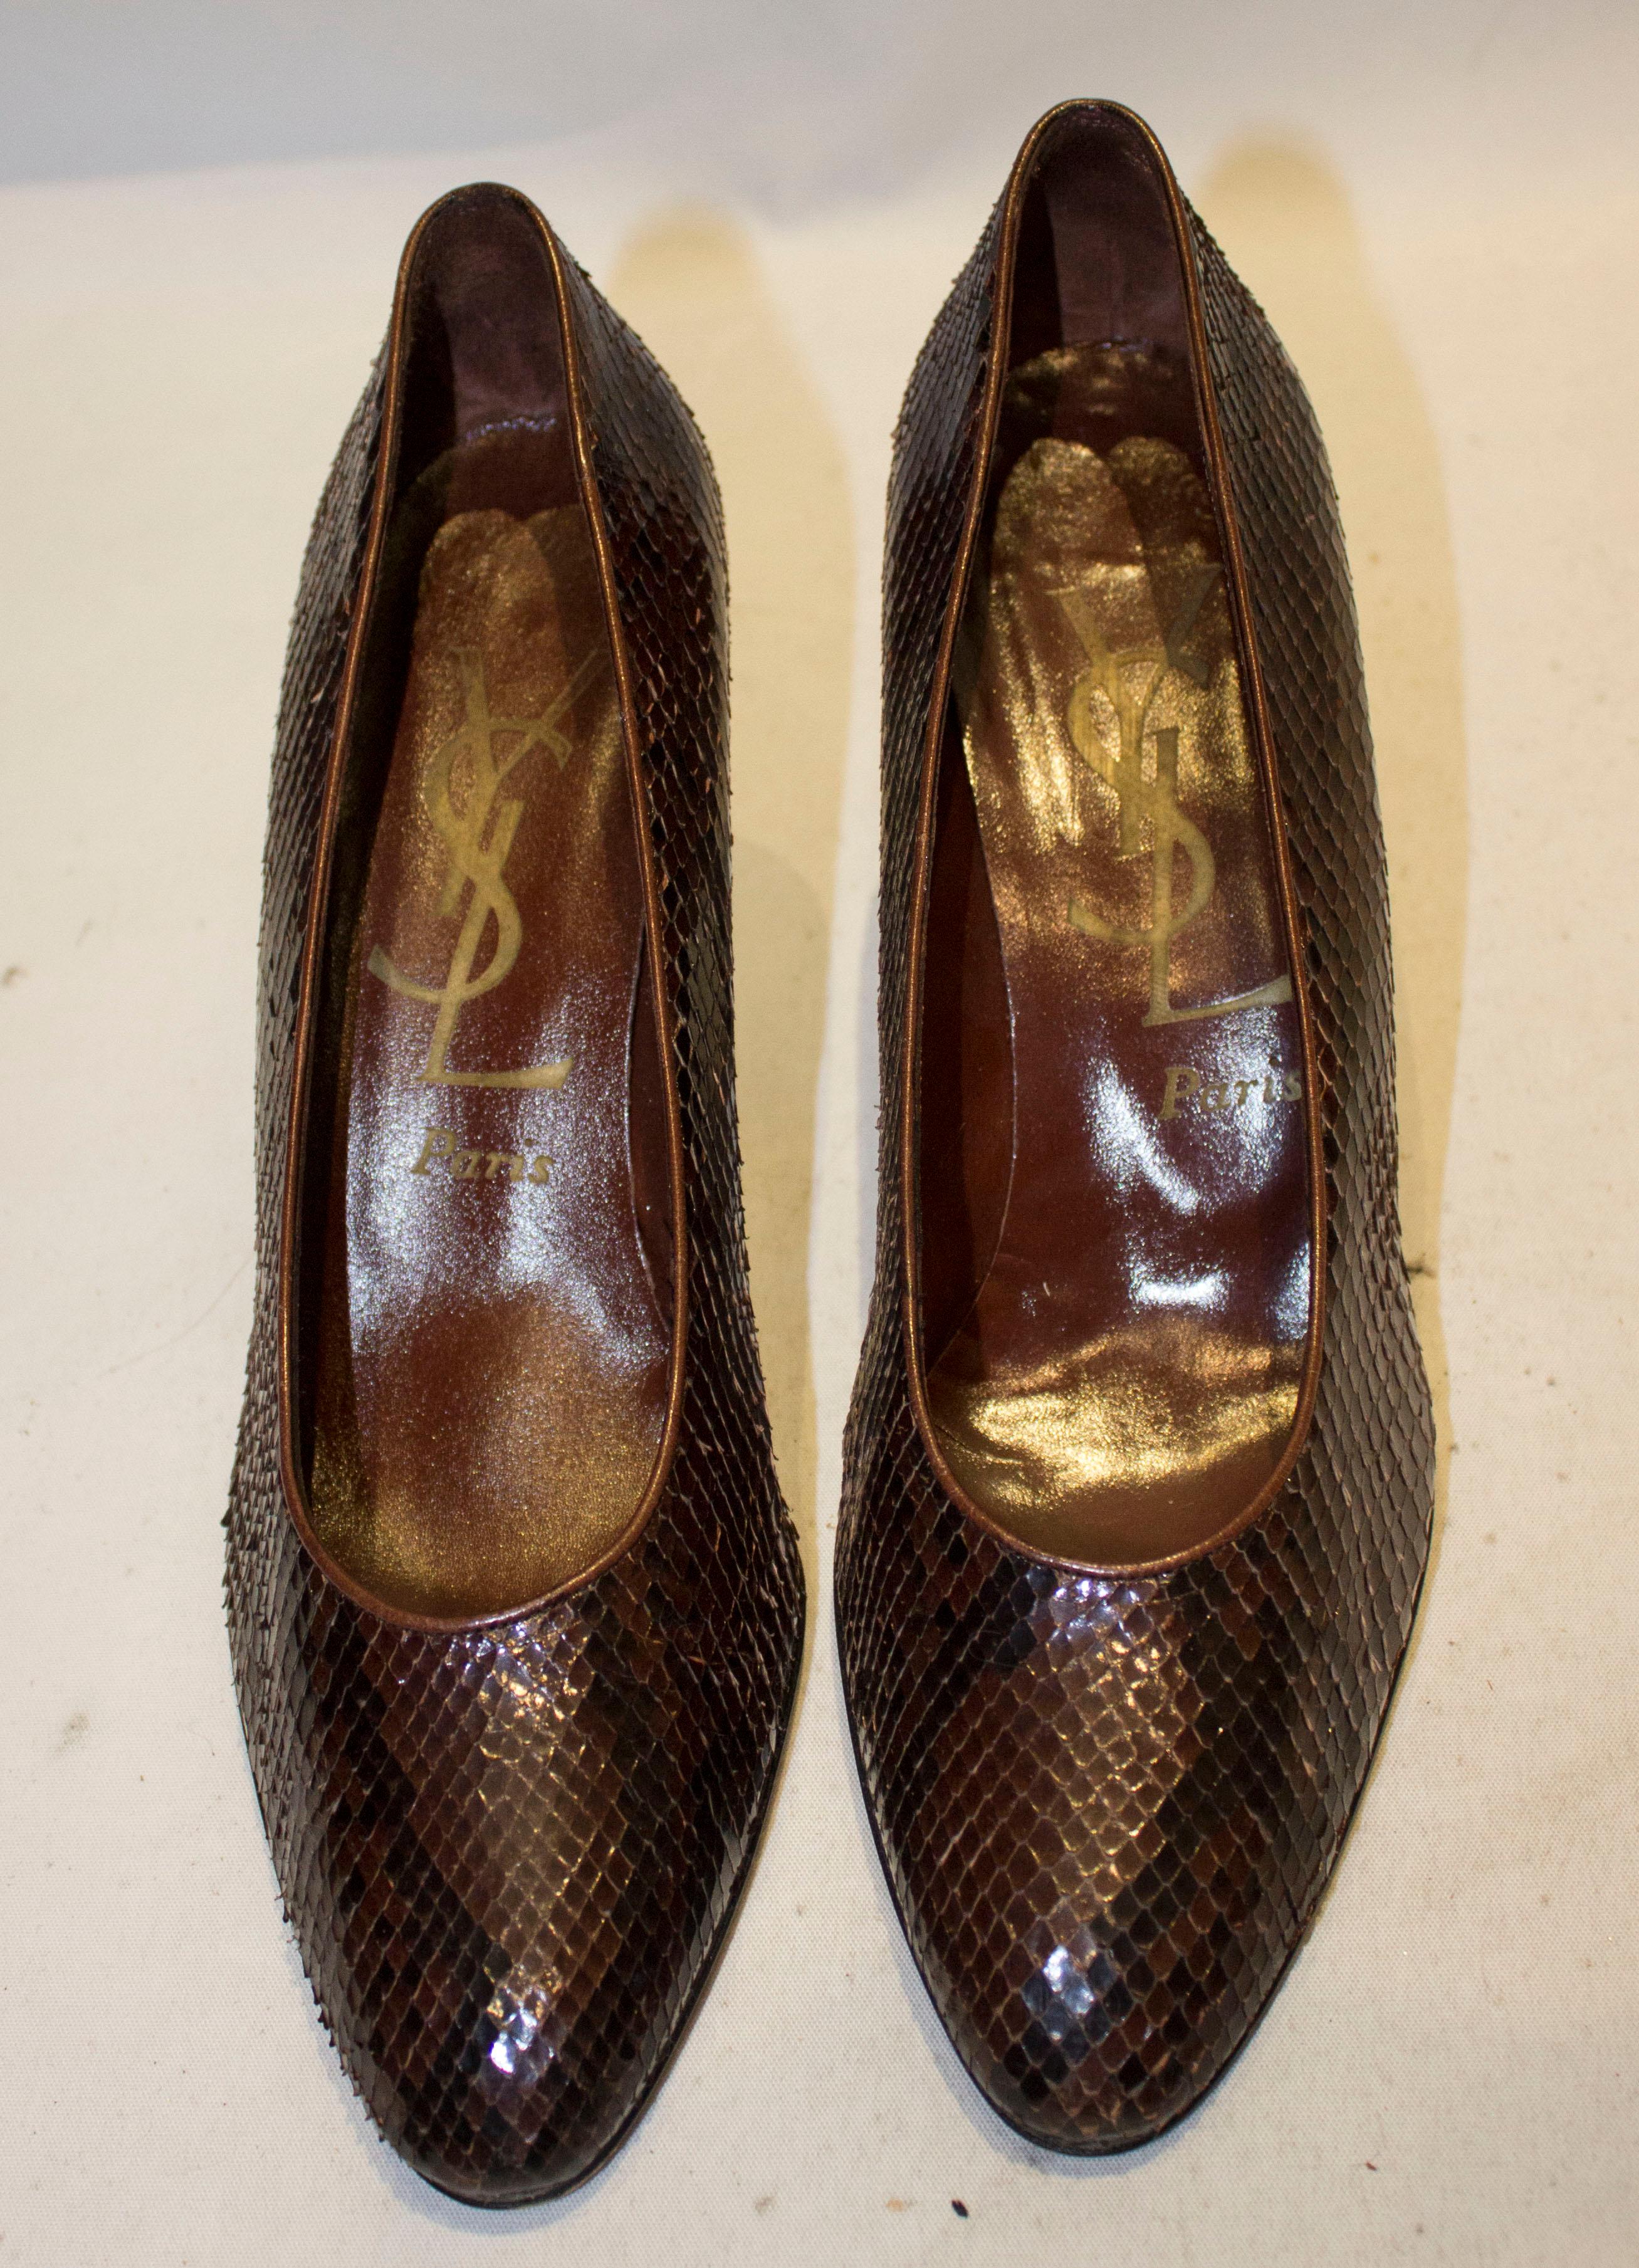 A chic pair of vintage Yves Saint Laurent Paris shoes in brown and black snakeskin. 
The shoes are style 84327, in a size 81 /2 M , with heel height 3 1/2''